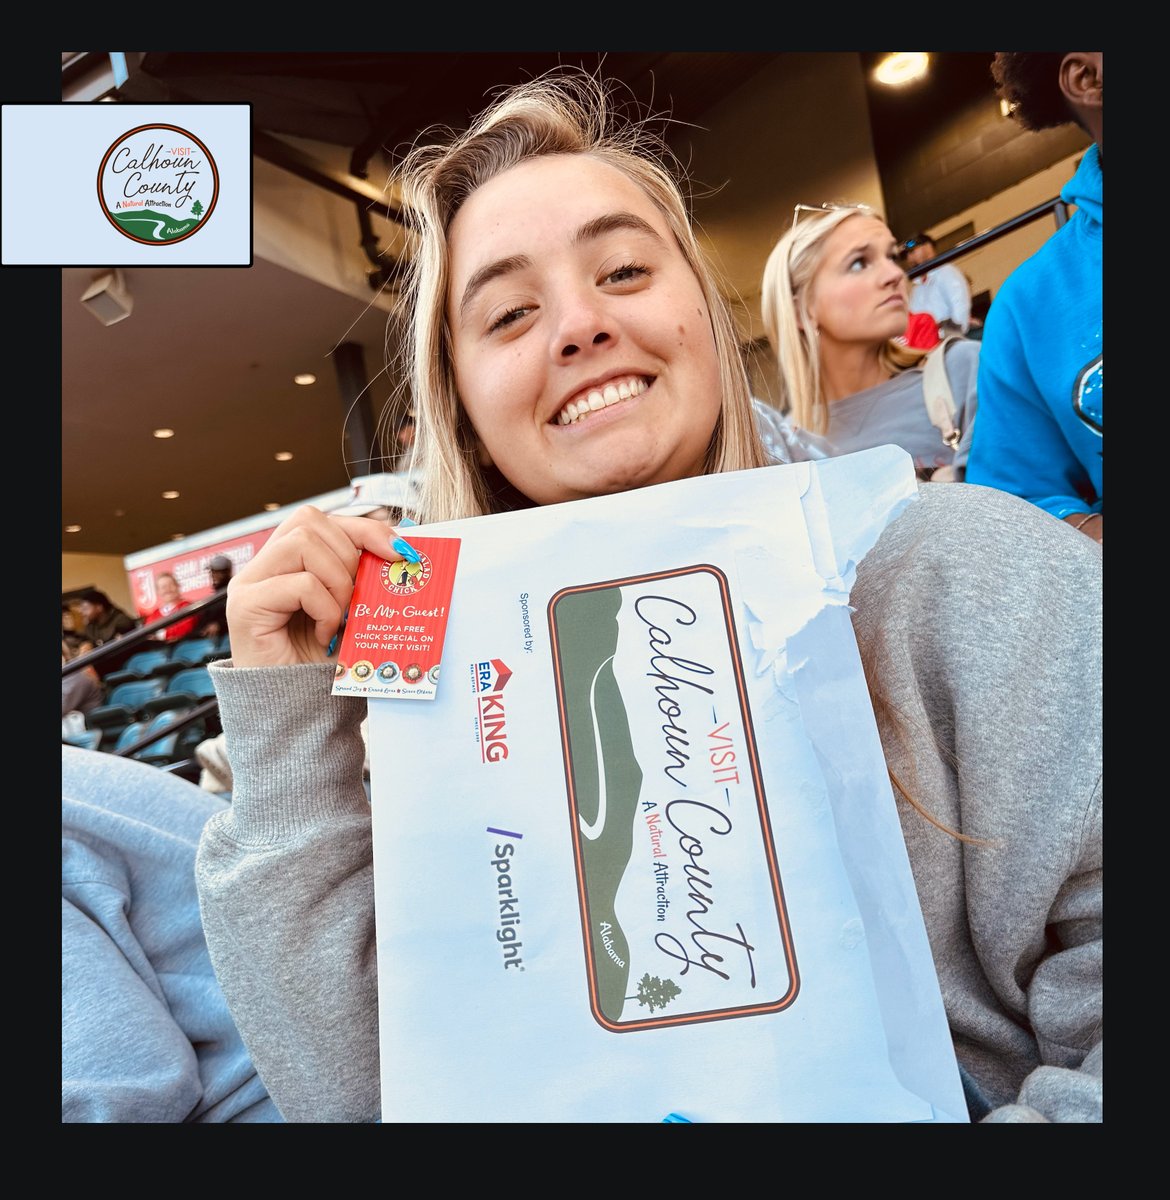 The Jax State Gamecocks like to welcome all guests to Jacksonville! In the spirit of hospitality and sportsmanship, one lucky fan received a gift certificate from @chickensaladchi (Oxford, AL). Brought to you by Visit Calhoun County, Alabama.